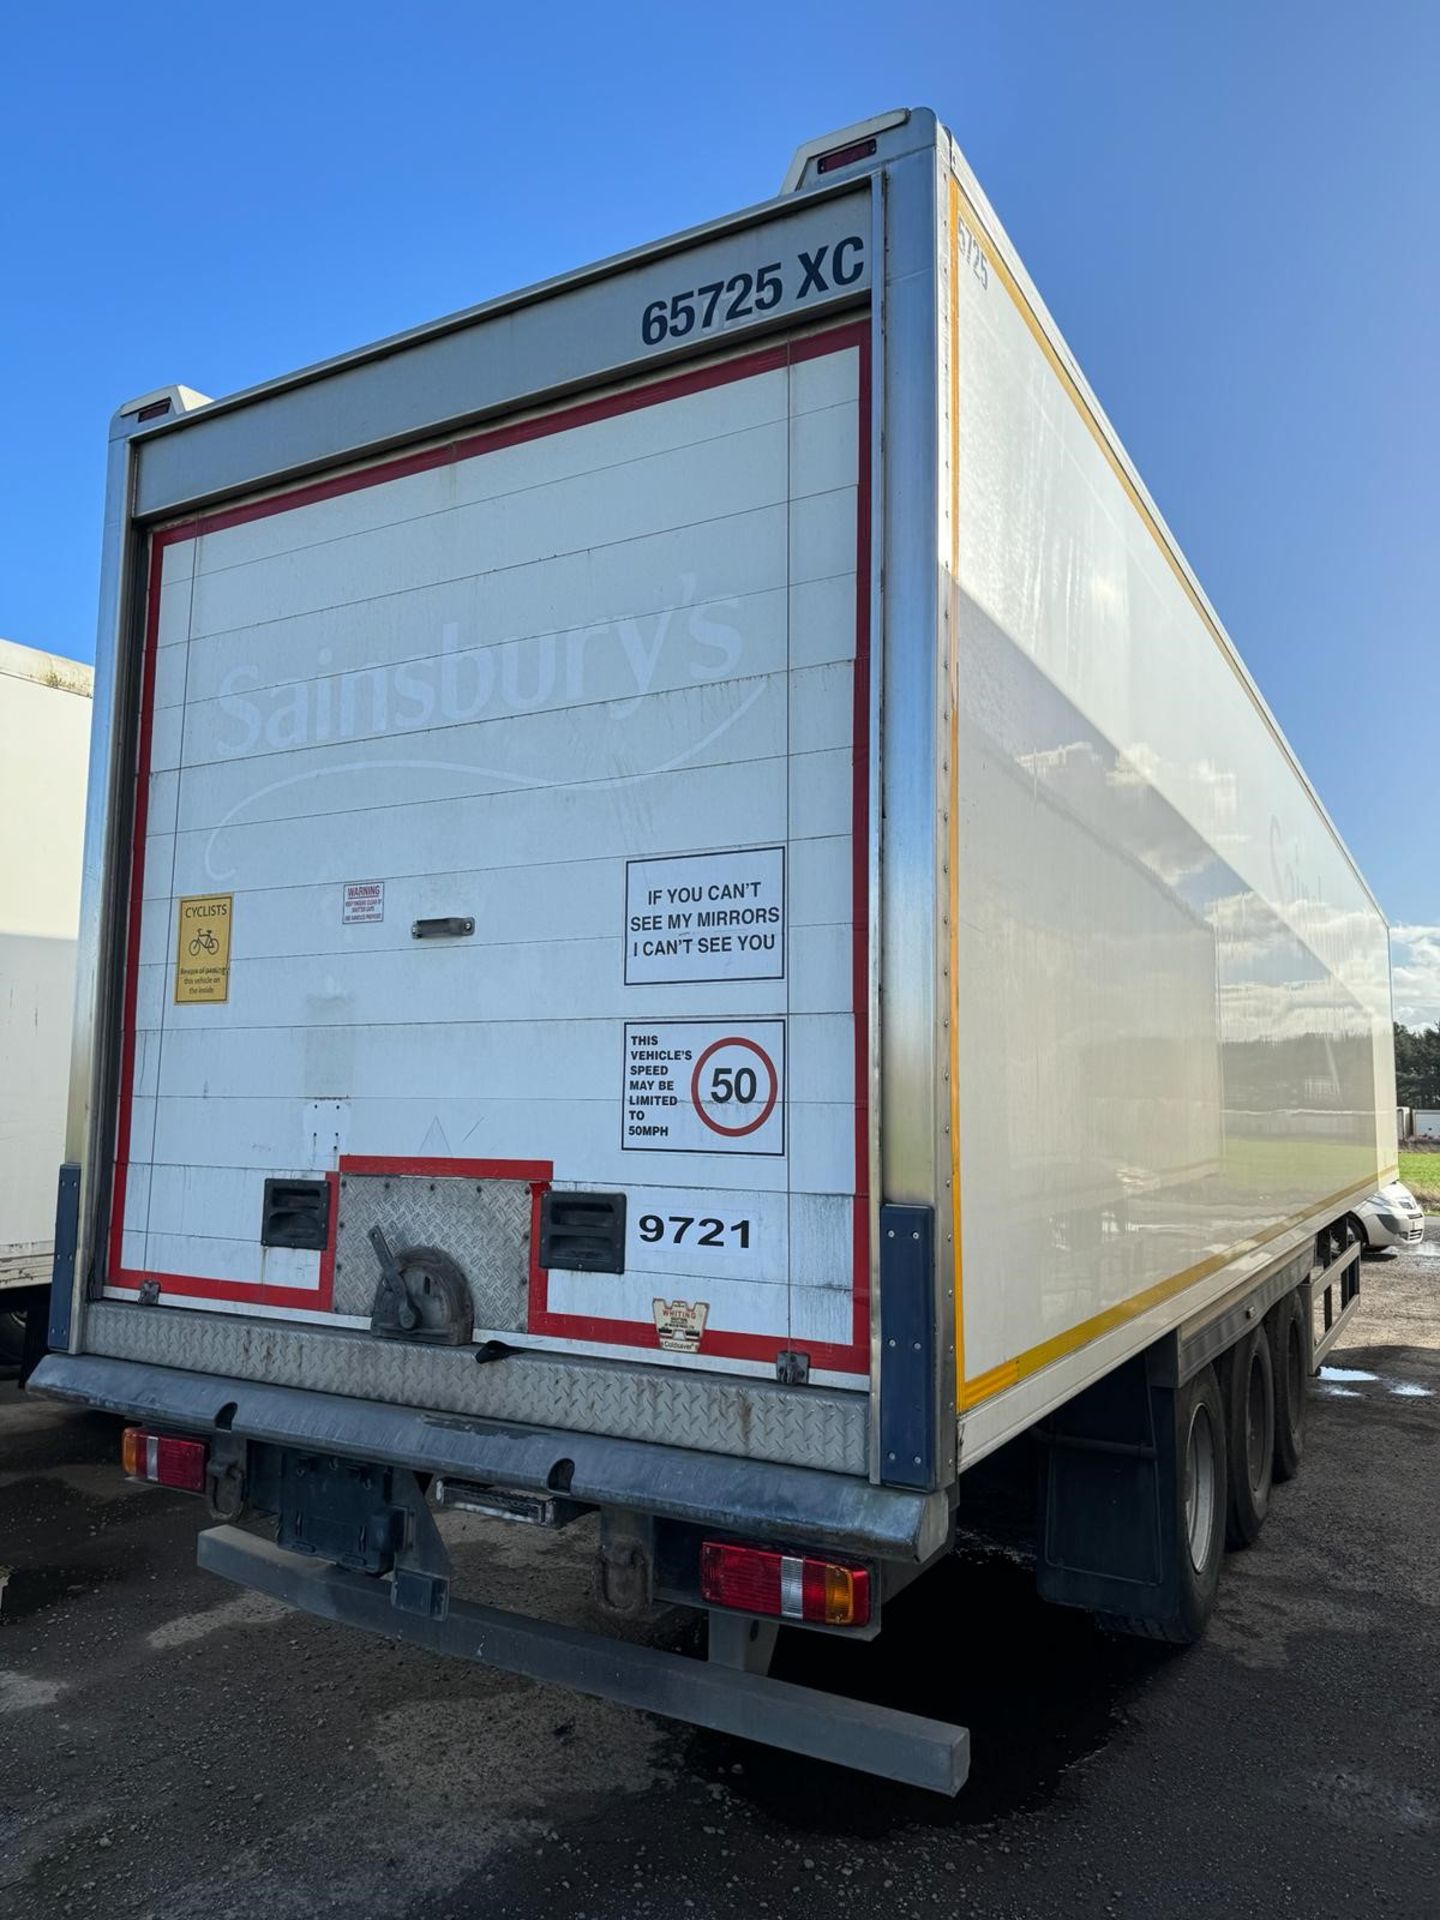 2015 Montracon 13.6 Refrigerated Multi-Temp Trailer - Image 12 of 13